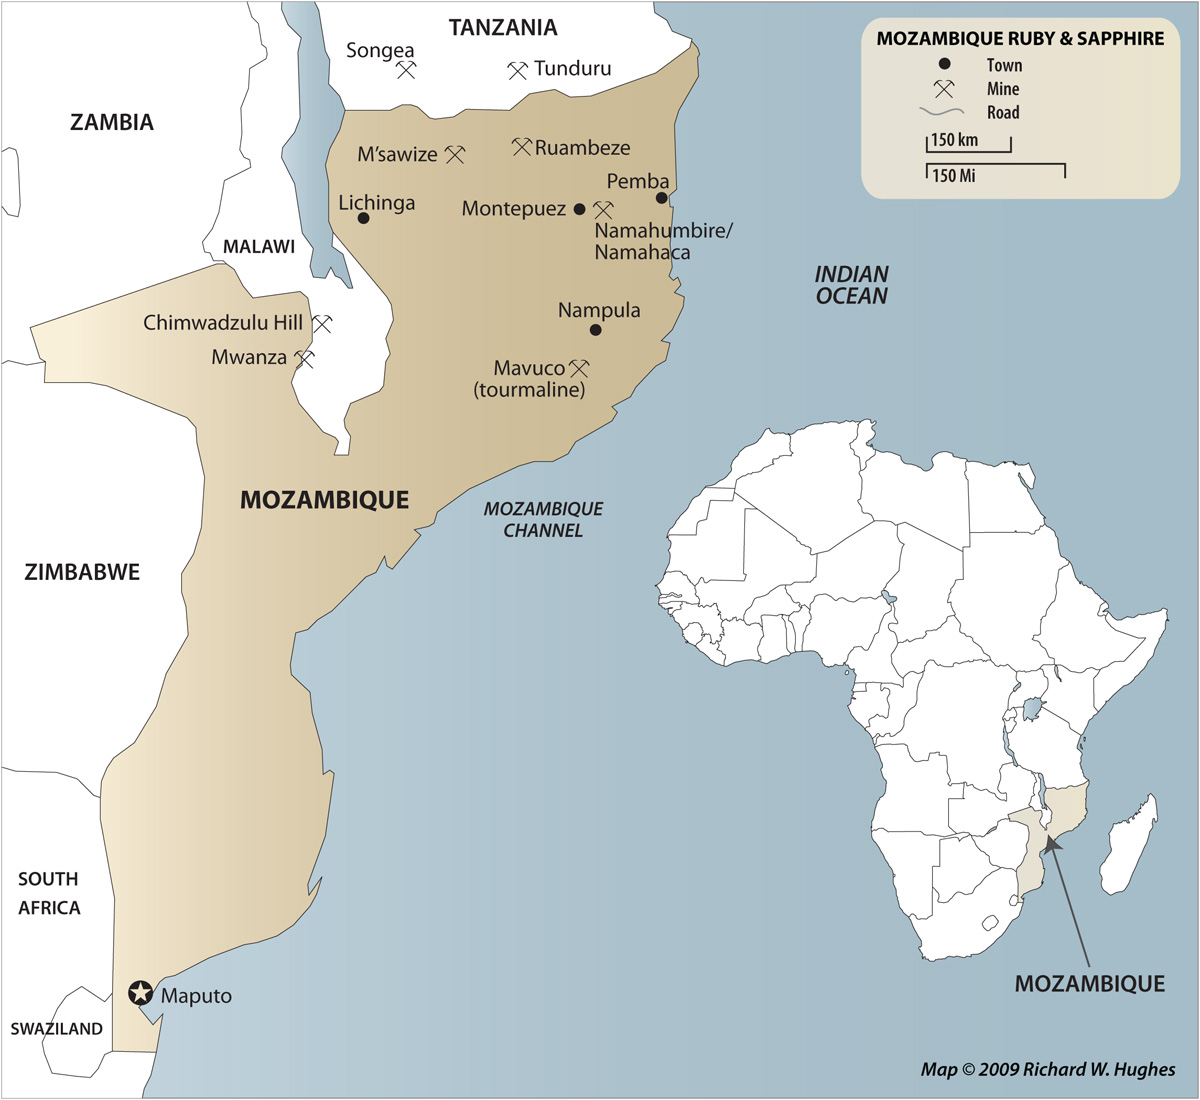 Map of Mozambique, showing the location of the ruby mines near Montepuez.